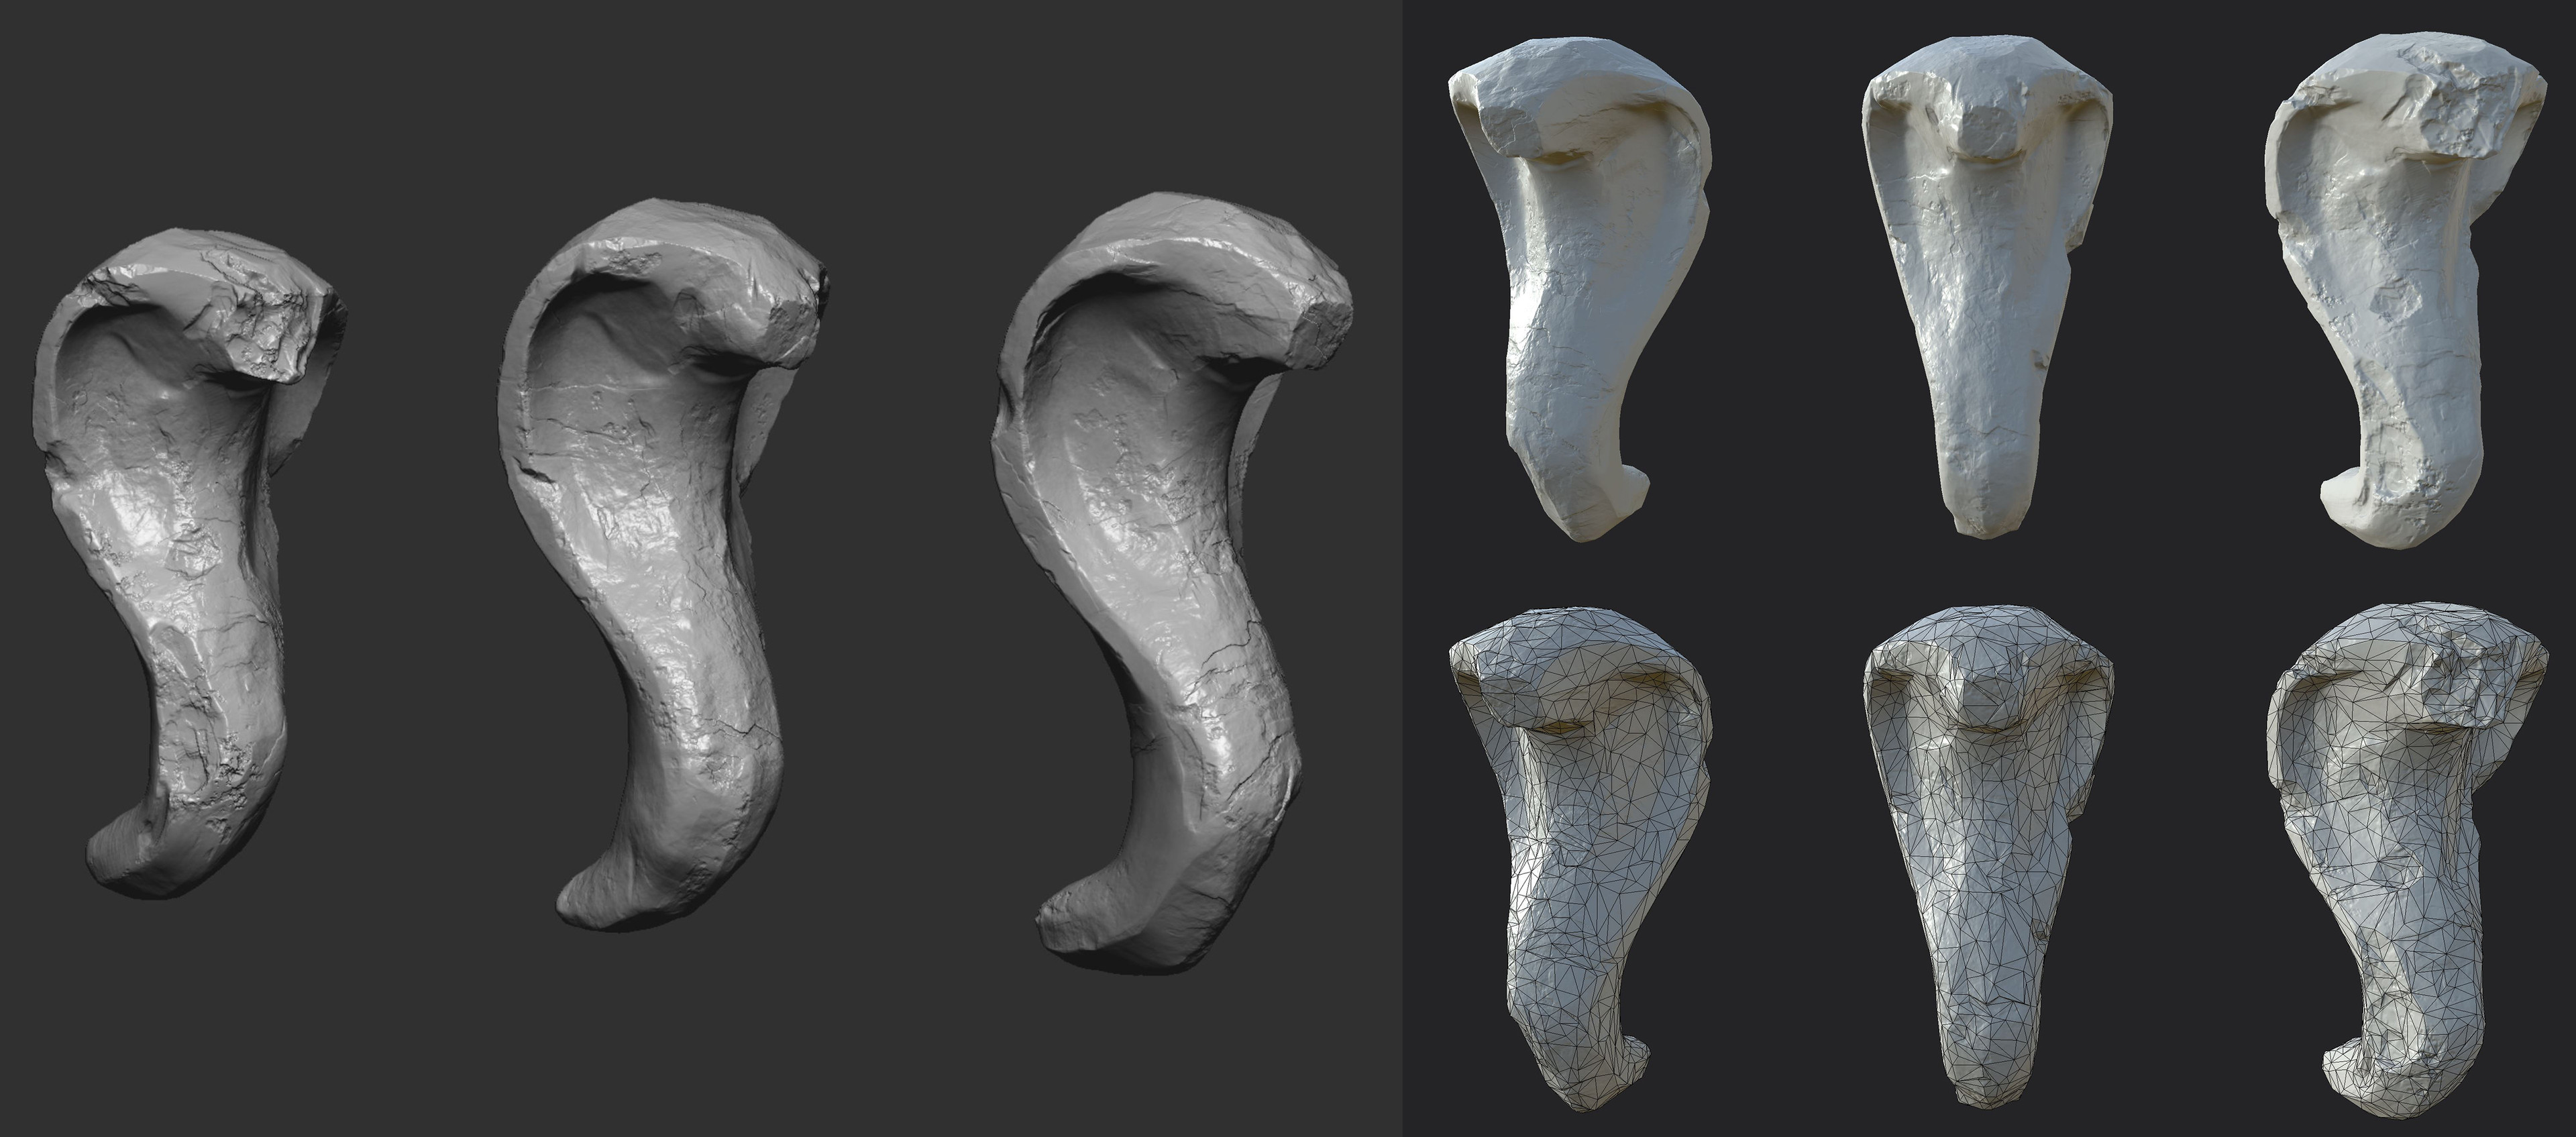 Zbrush model on left side, low poly bake and wire-frame on right side